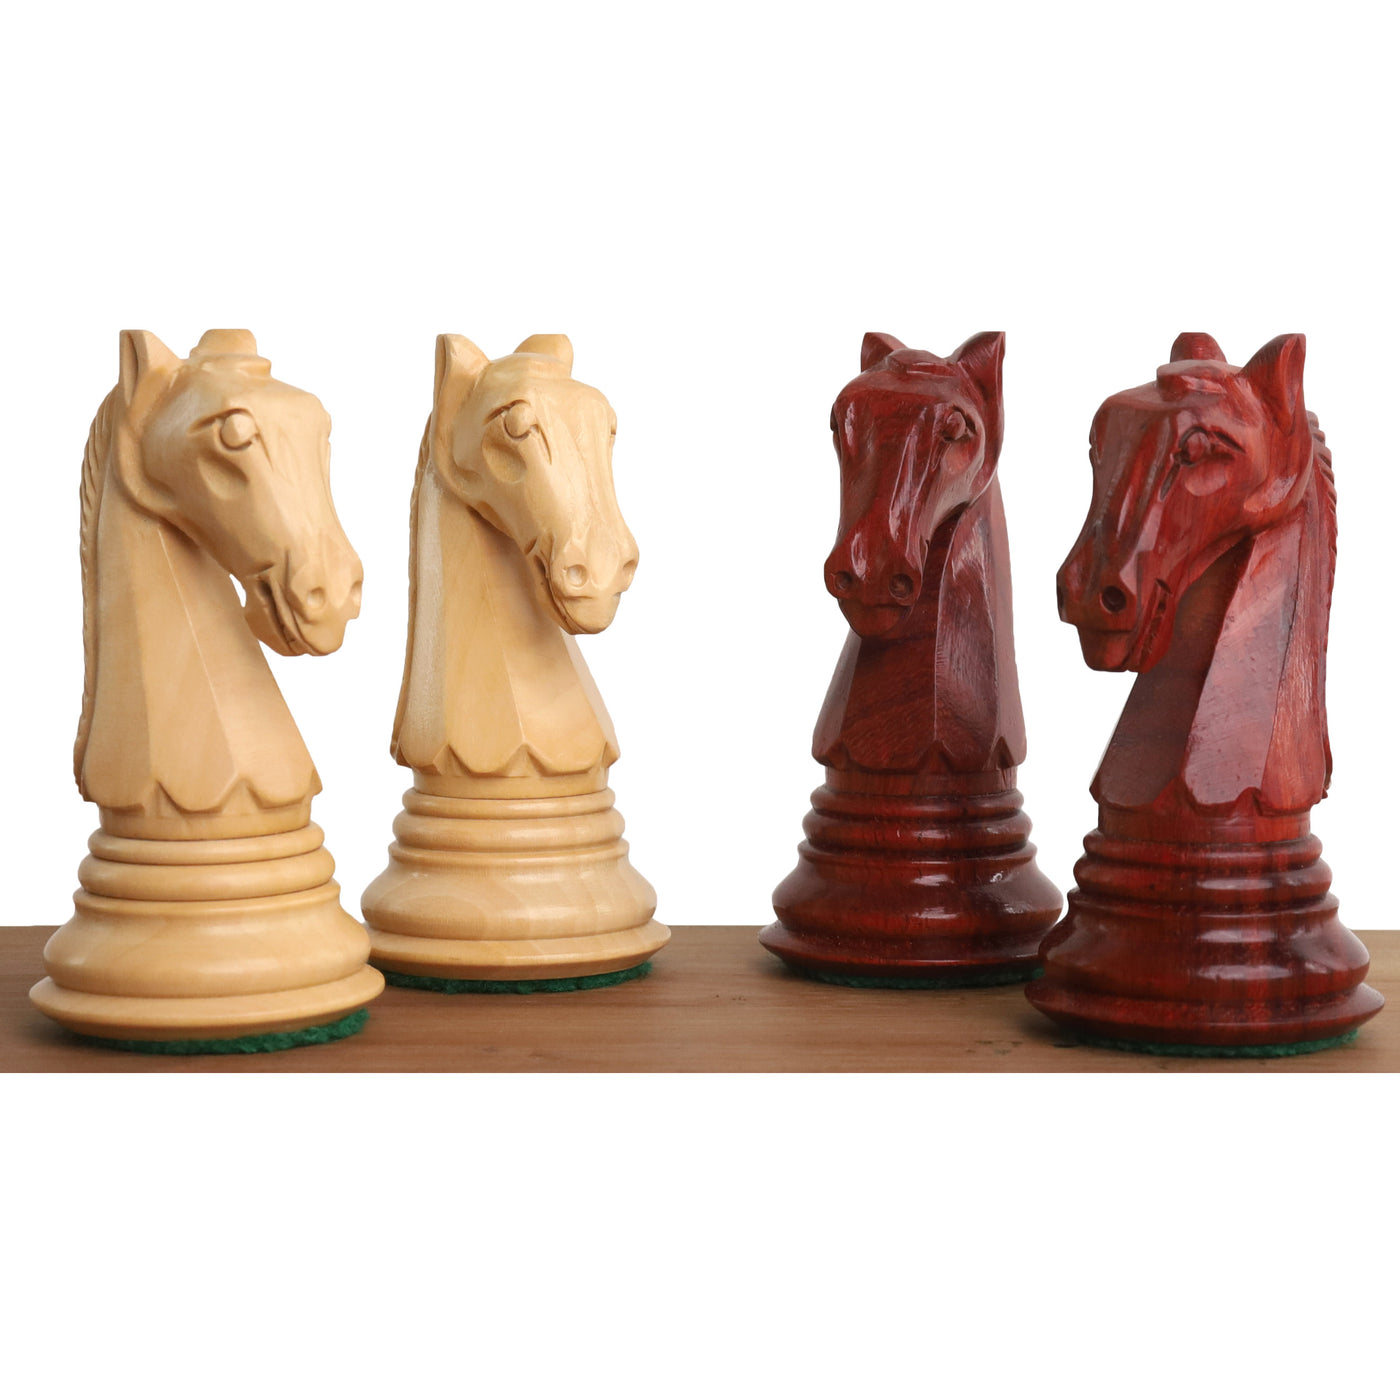 Slightly Imperfect 3.9" New Columbian Staunton Chess Pieces Only Set -Bud Rosewood- Double Weighted